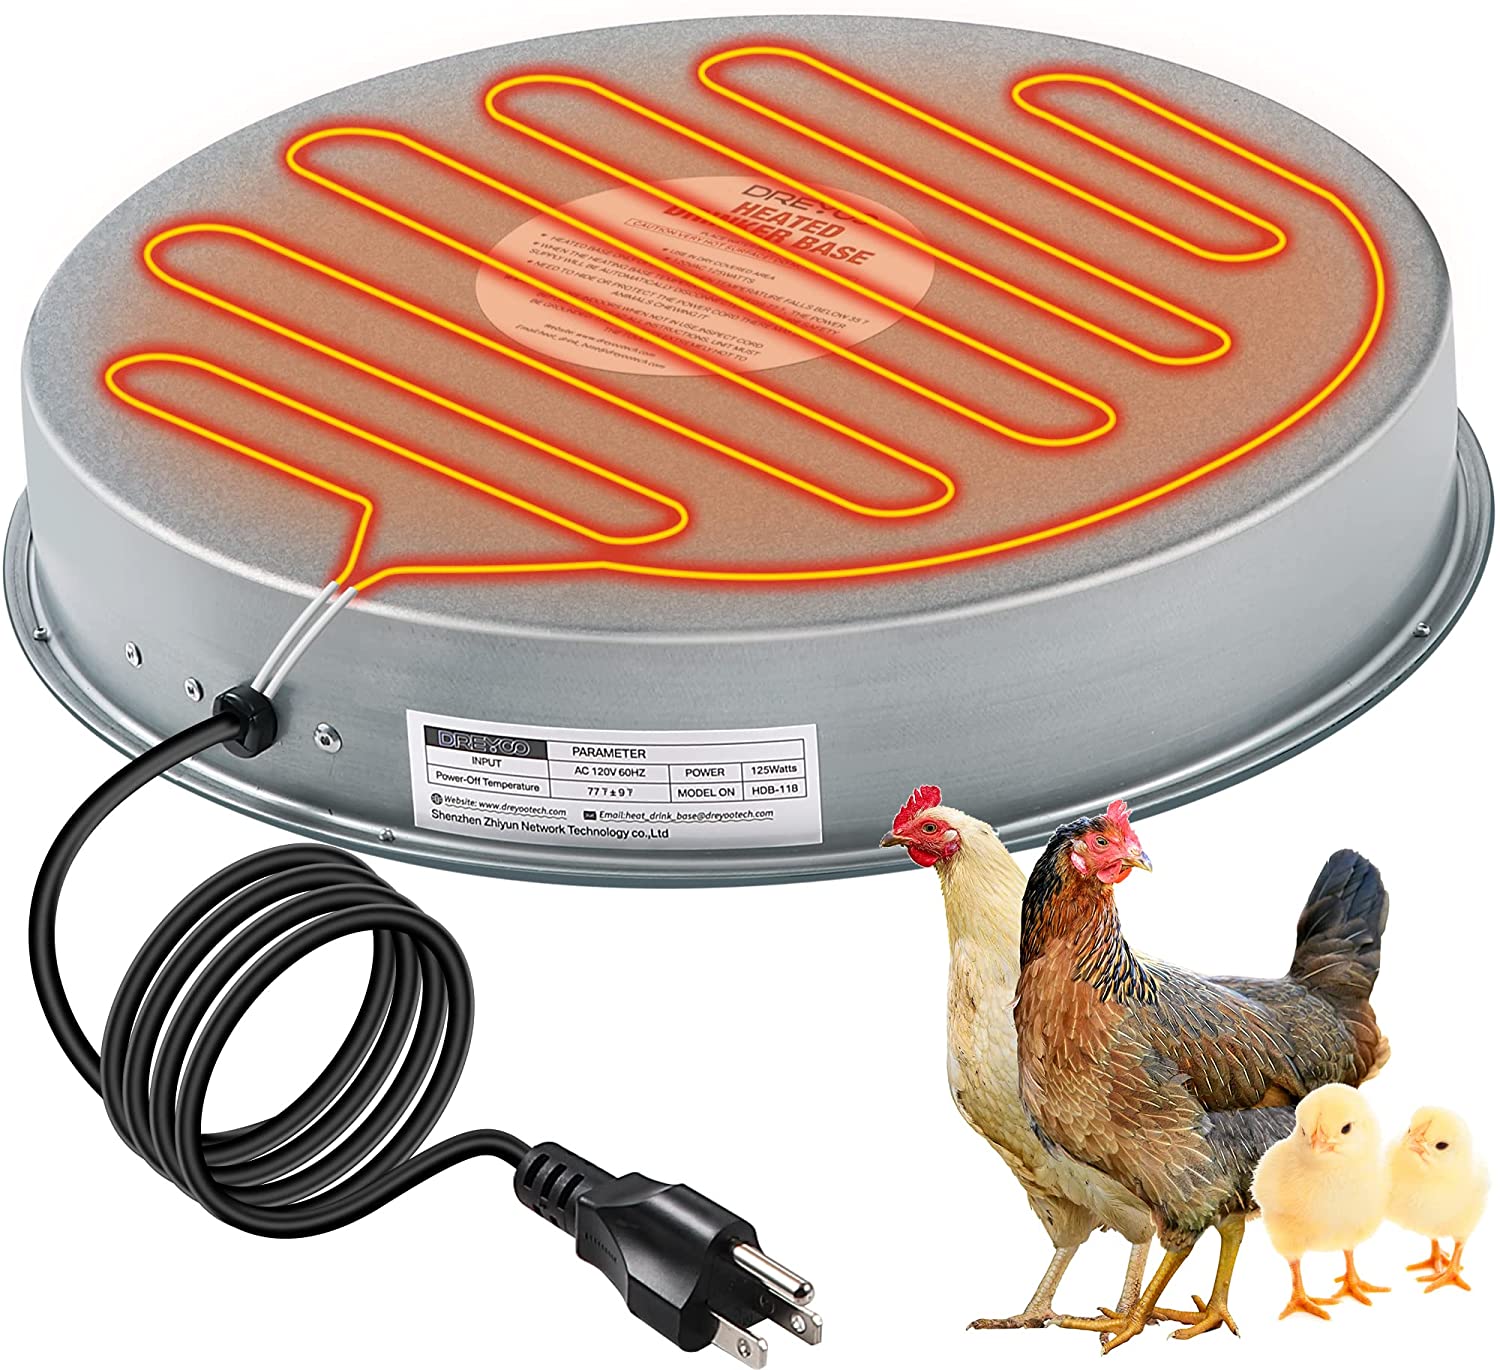 Poultry Waterer Heated Base